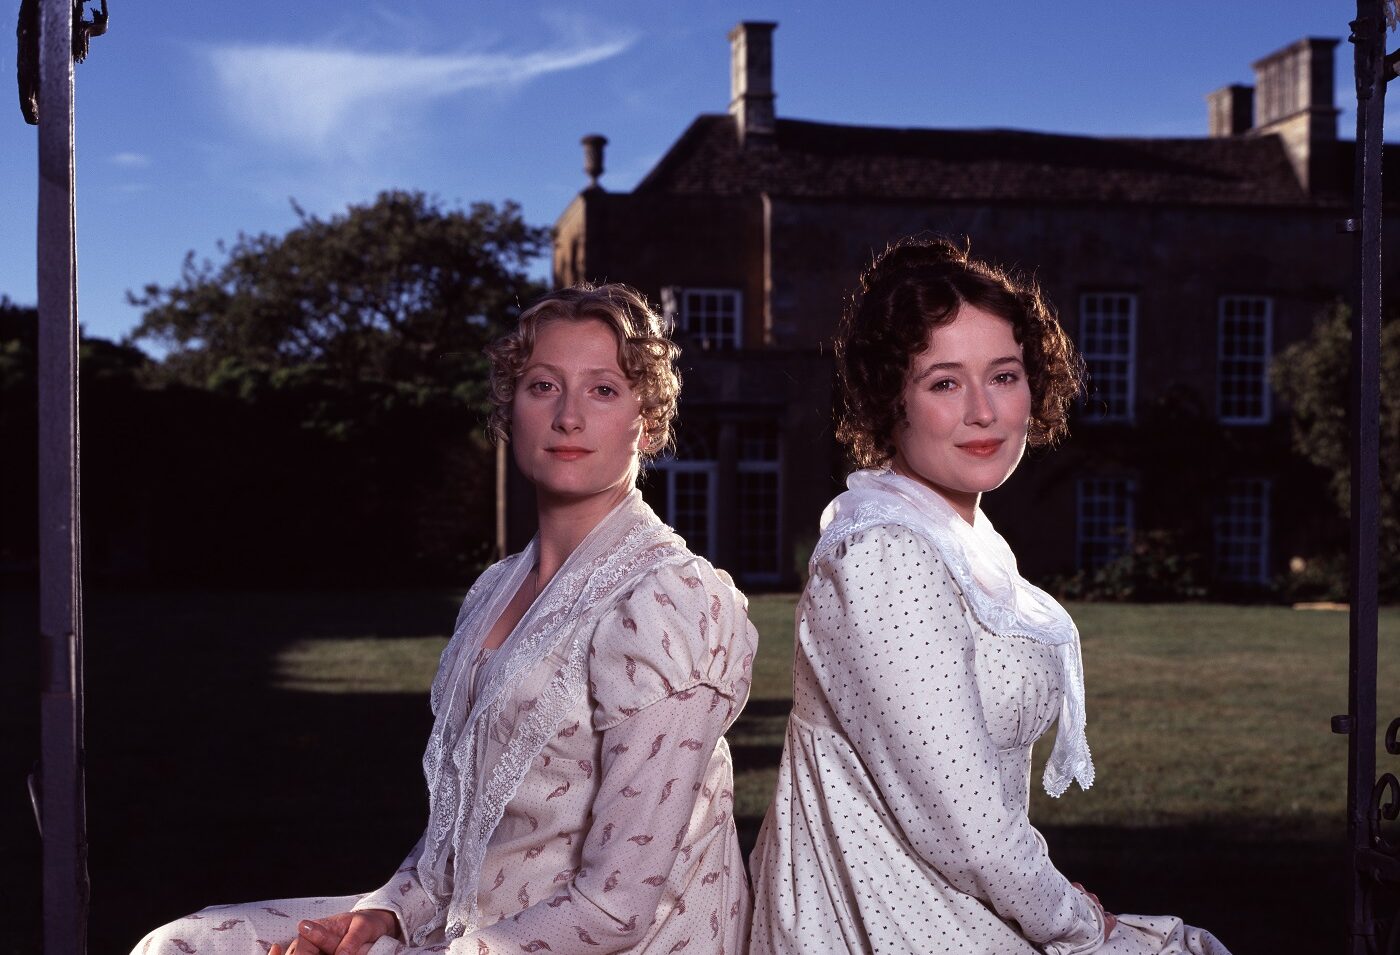 Lizzy Bennet (played by Jennifer Ehle) and Jane Bennet (played by Susannah Harker). Image ©BBC